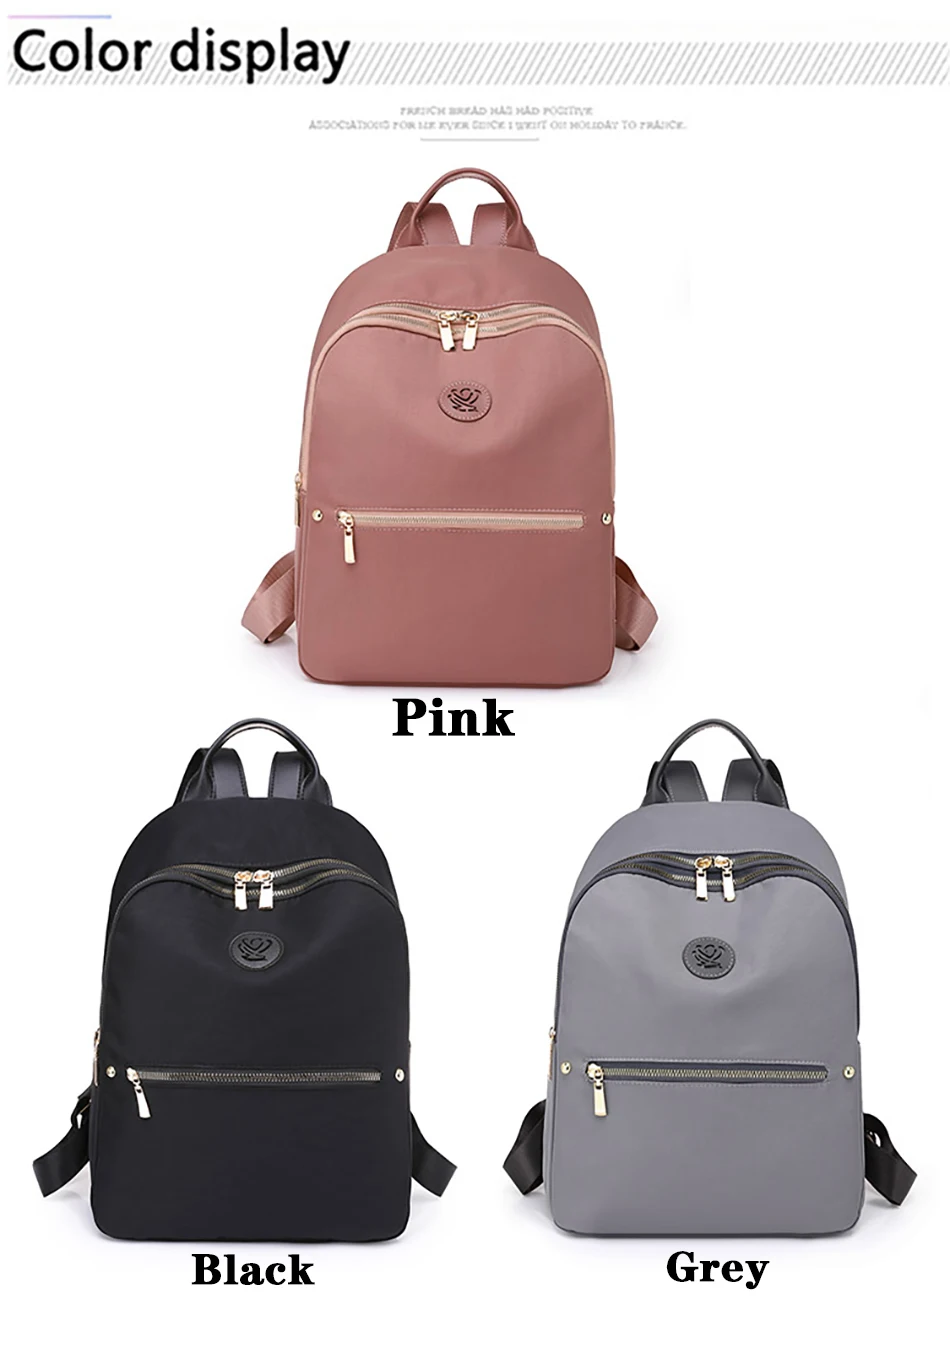 Stylish Backpacks best of sale  New Designer Oxford Cloth Backpack Women's Multifunctional Anti Theft Shoulder Bags Suitable For Girls School Simple School Bags cool everyday backpacks